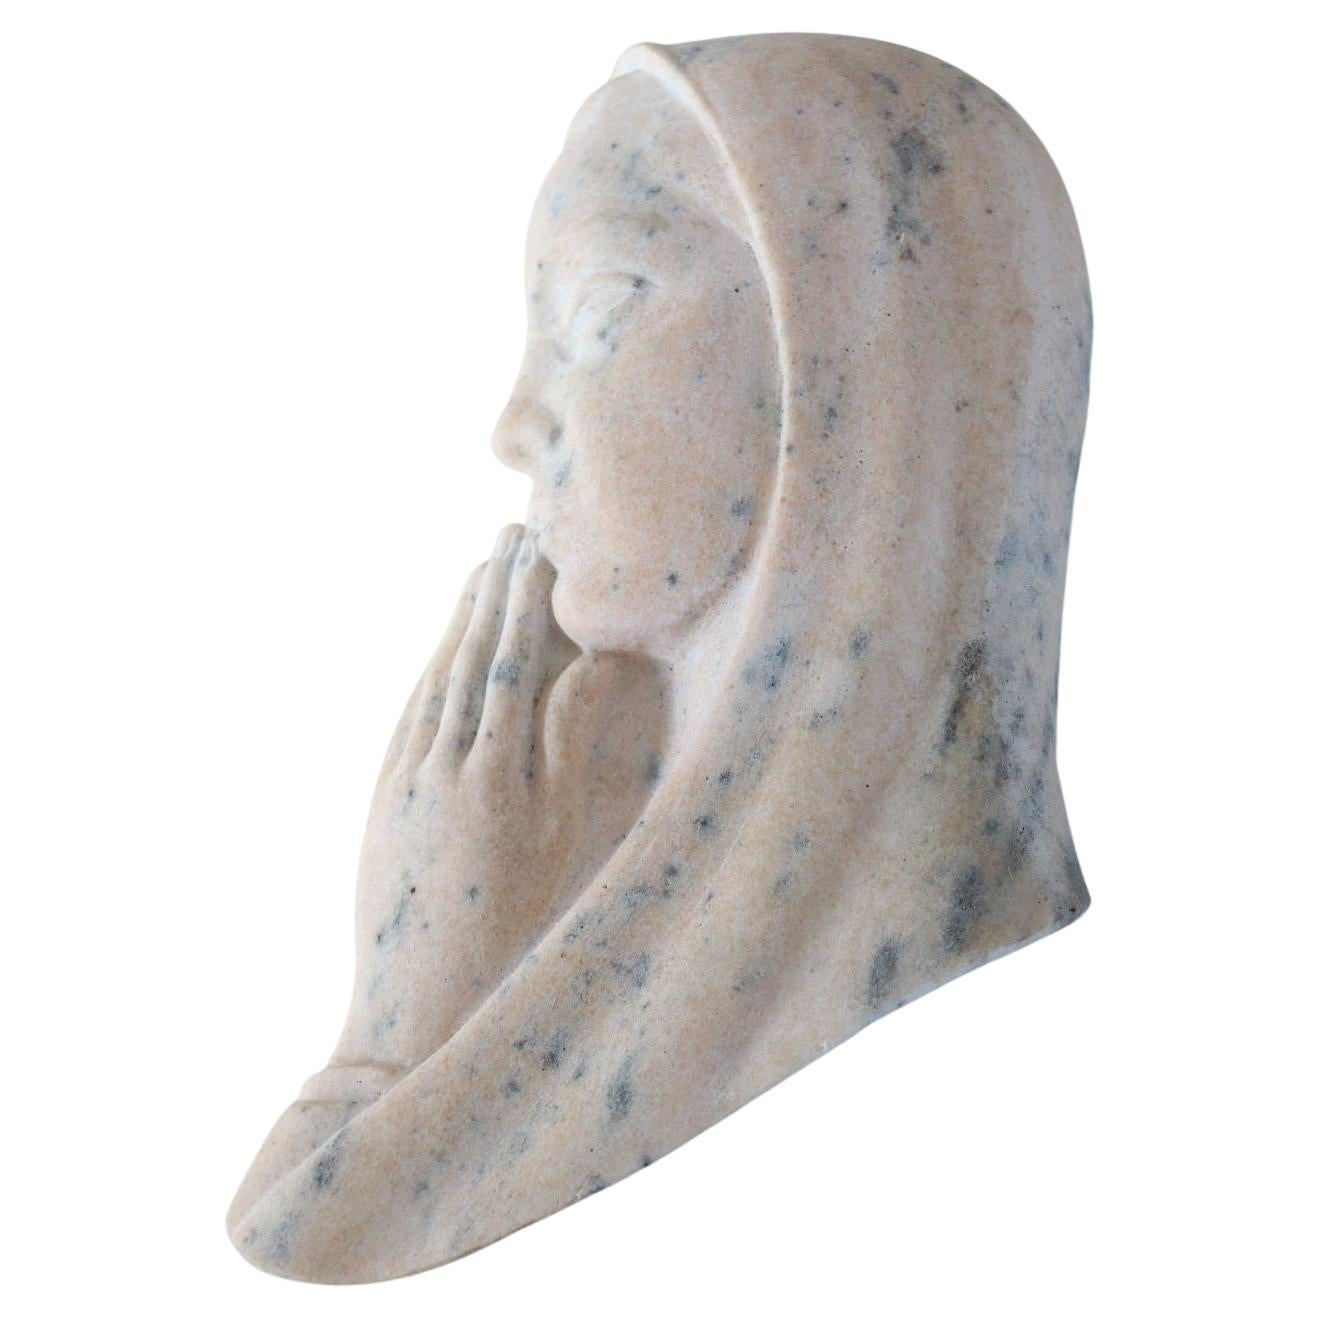 Art Deco Italian Sculpture in Precious Pink Marble from Portugal